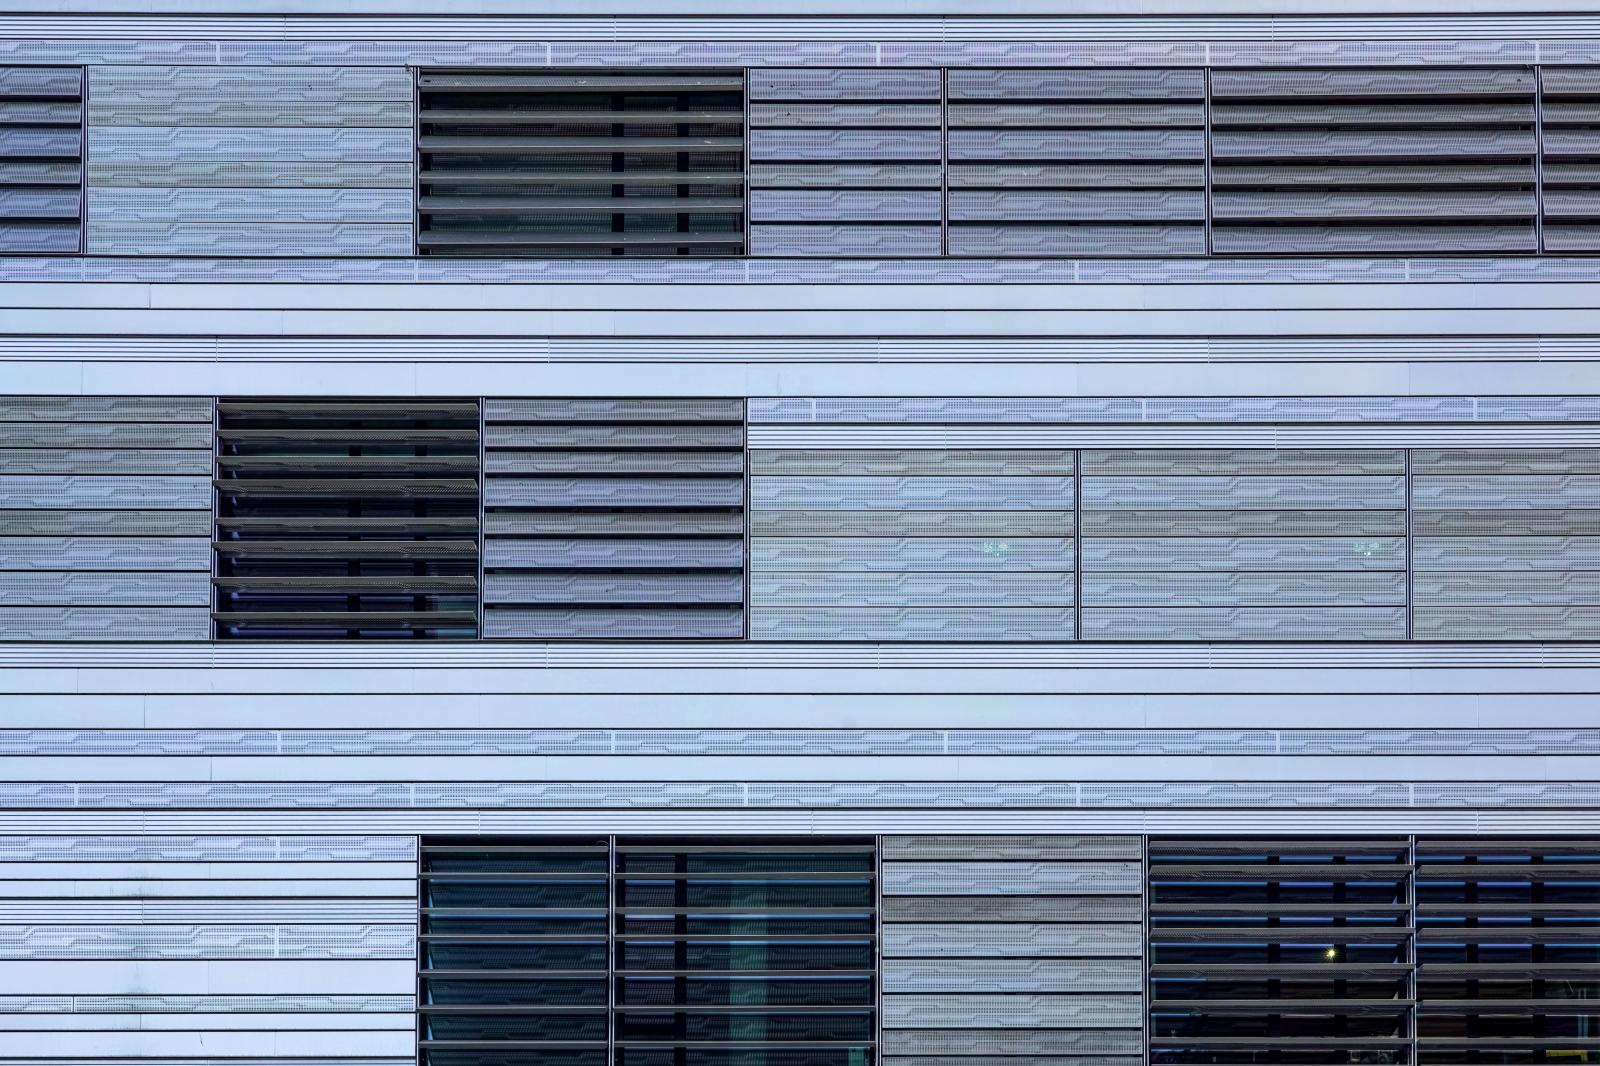 Linear Elegance: Transparency and Privacy | Buy this image